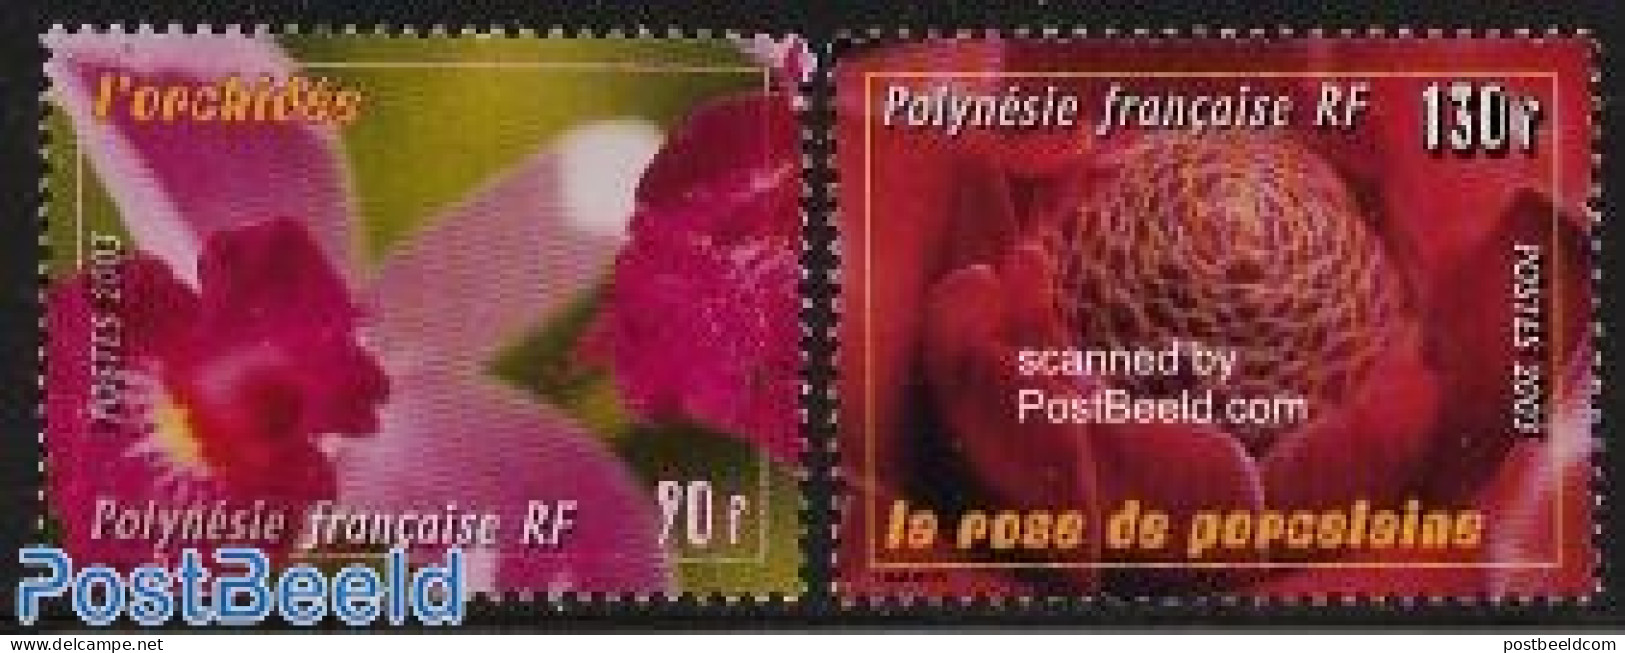 French Polynesia 2003 Flowers 2v, Mint NH, Nature - Flowers & Plants - Orchids - Neufs